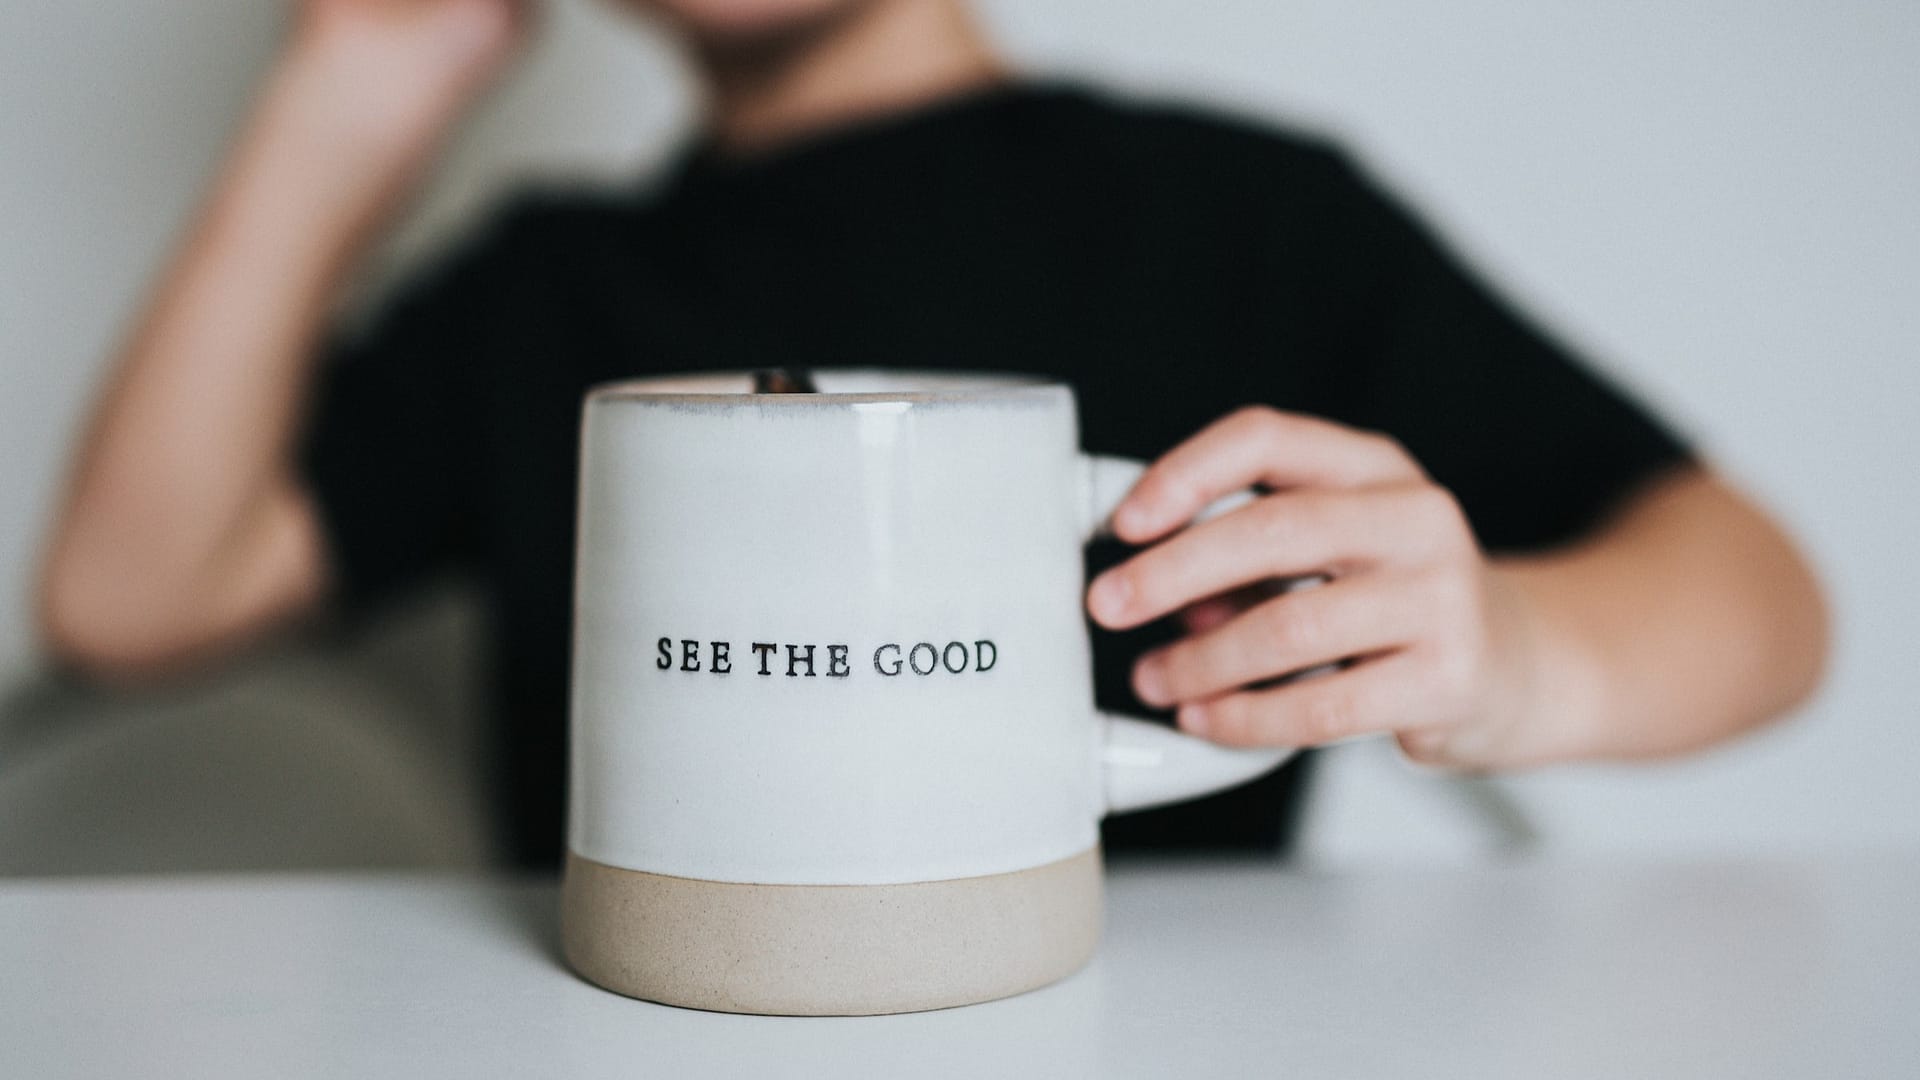 Image: A mug with "see the good" engraved on it.